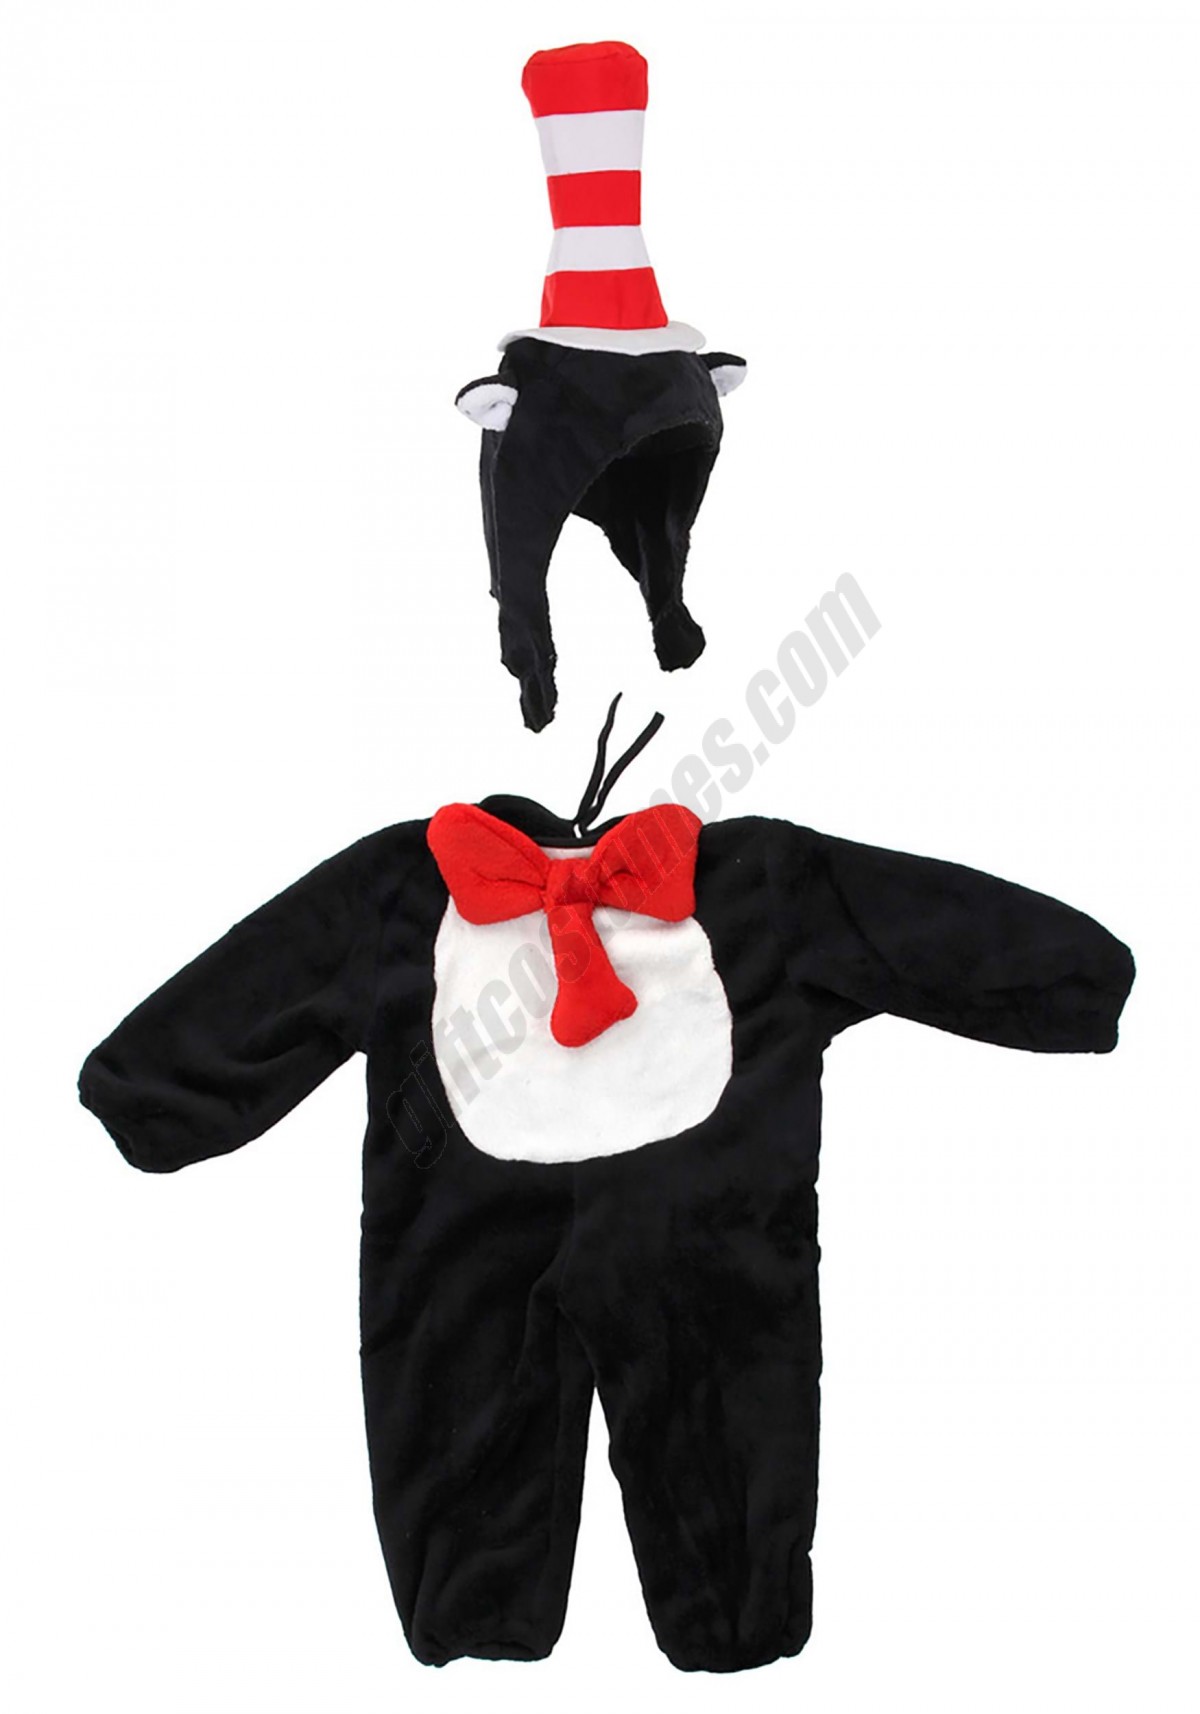 Dr. Seuss: The Cat in the Hat Deluxe Infant Costume Promotions - -6